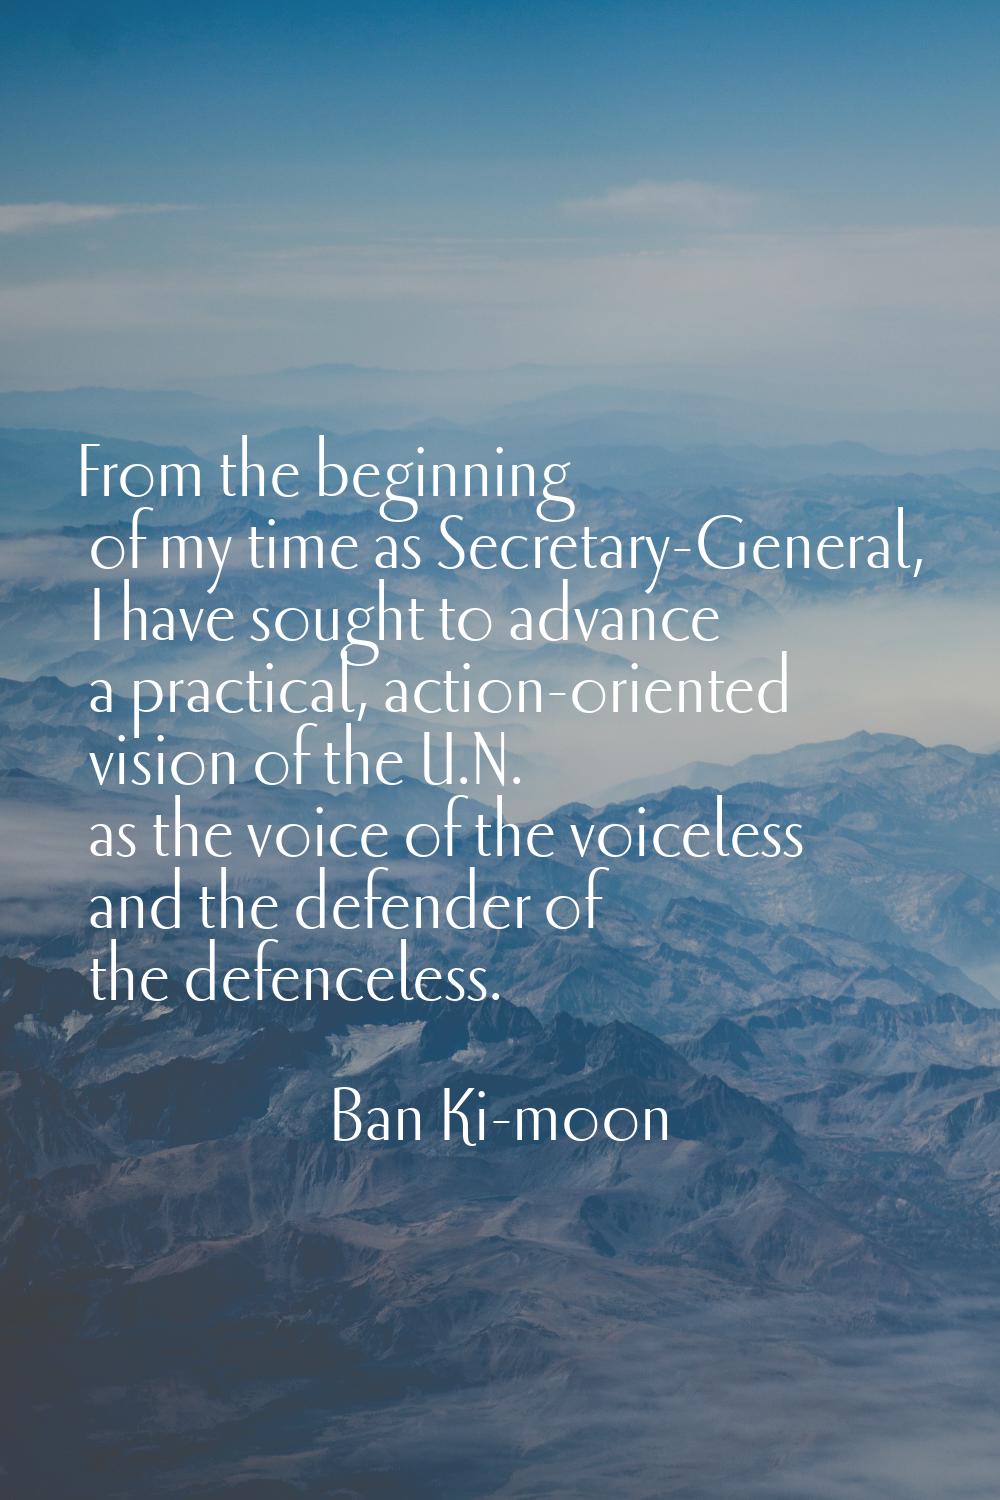 From the beginning of my time as Secretary-General, I have sought to advance a practical, action-or